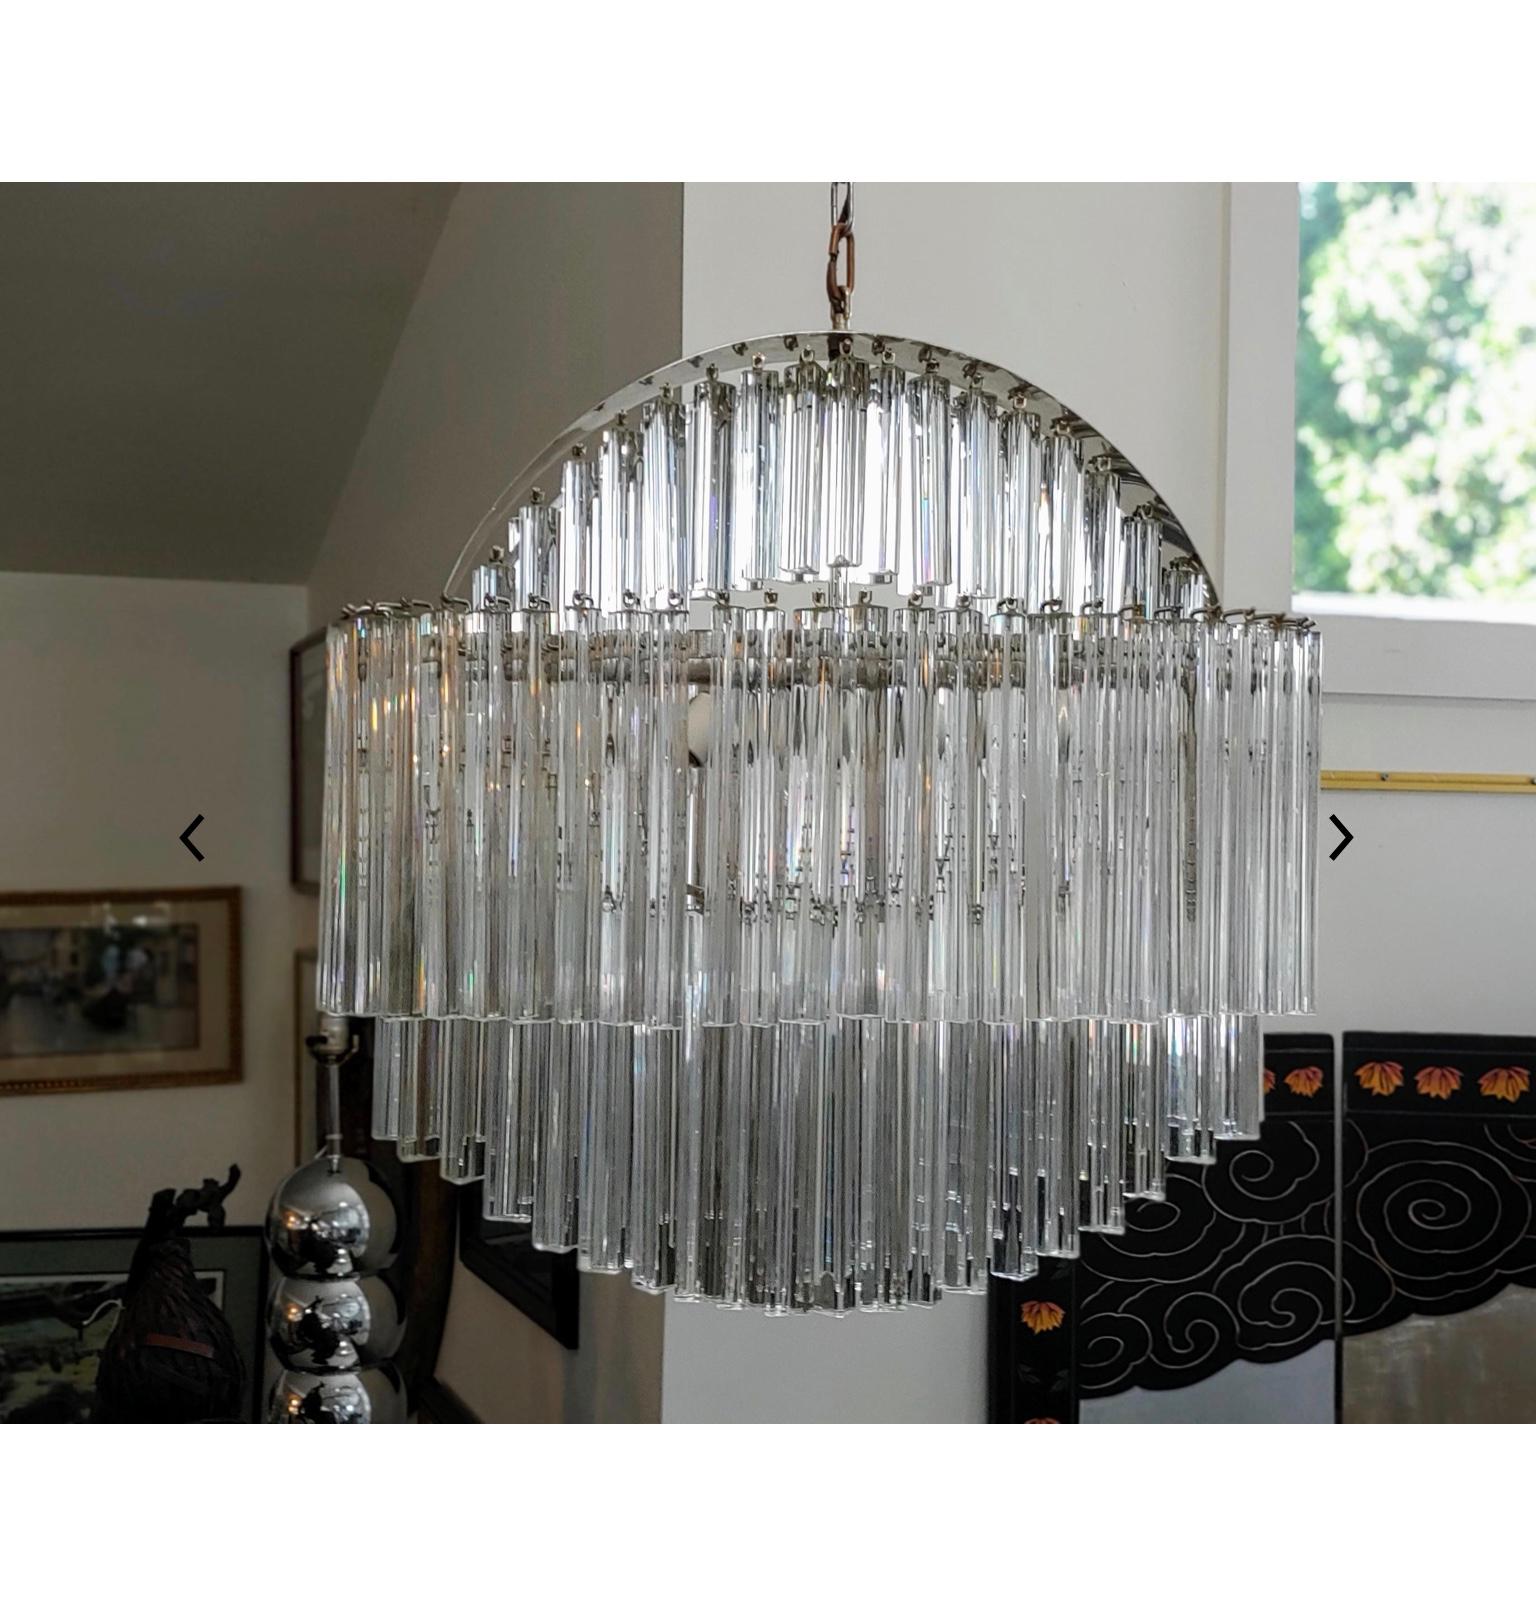 Magnificent midcentury 1970s Camer large chandelier with Murano glass.